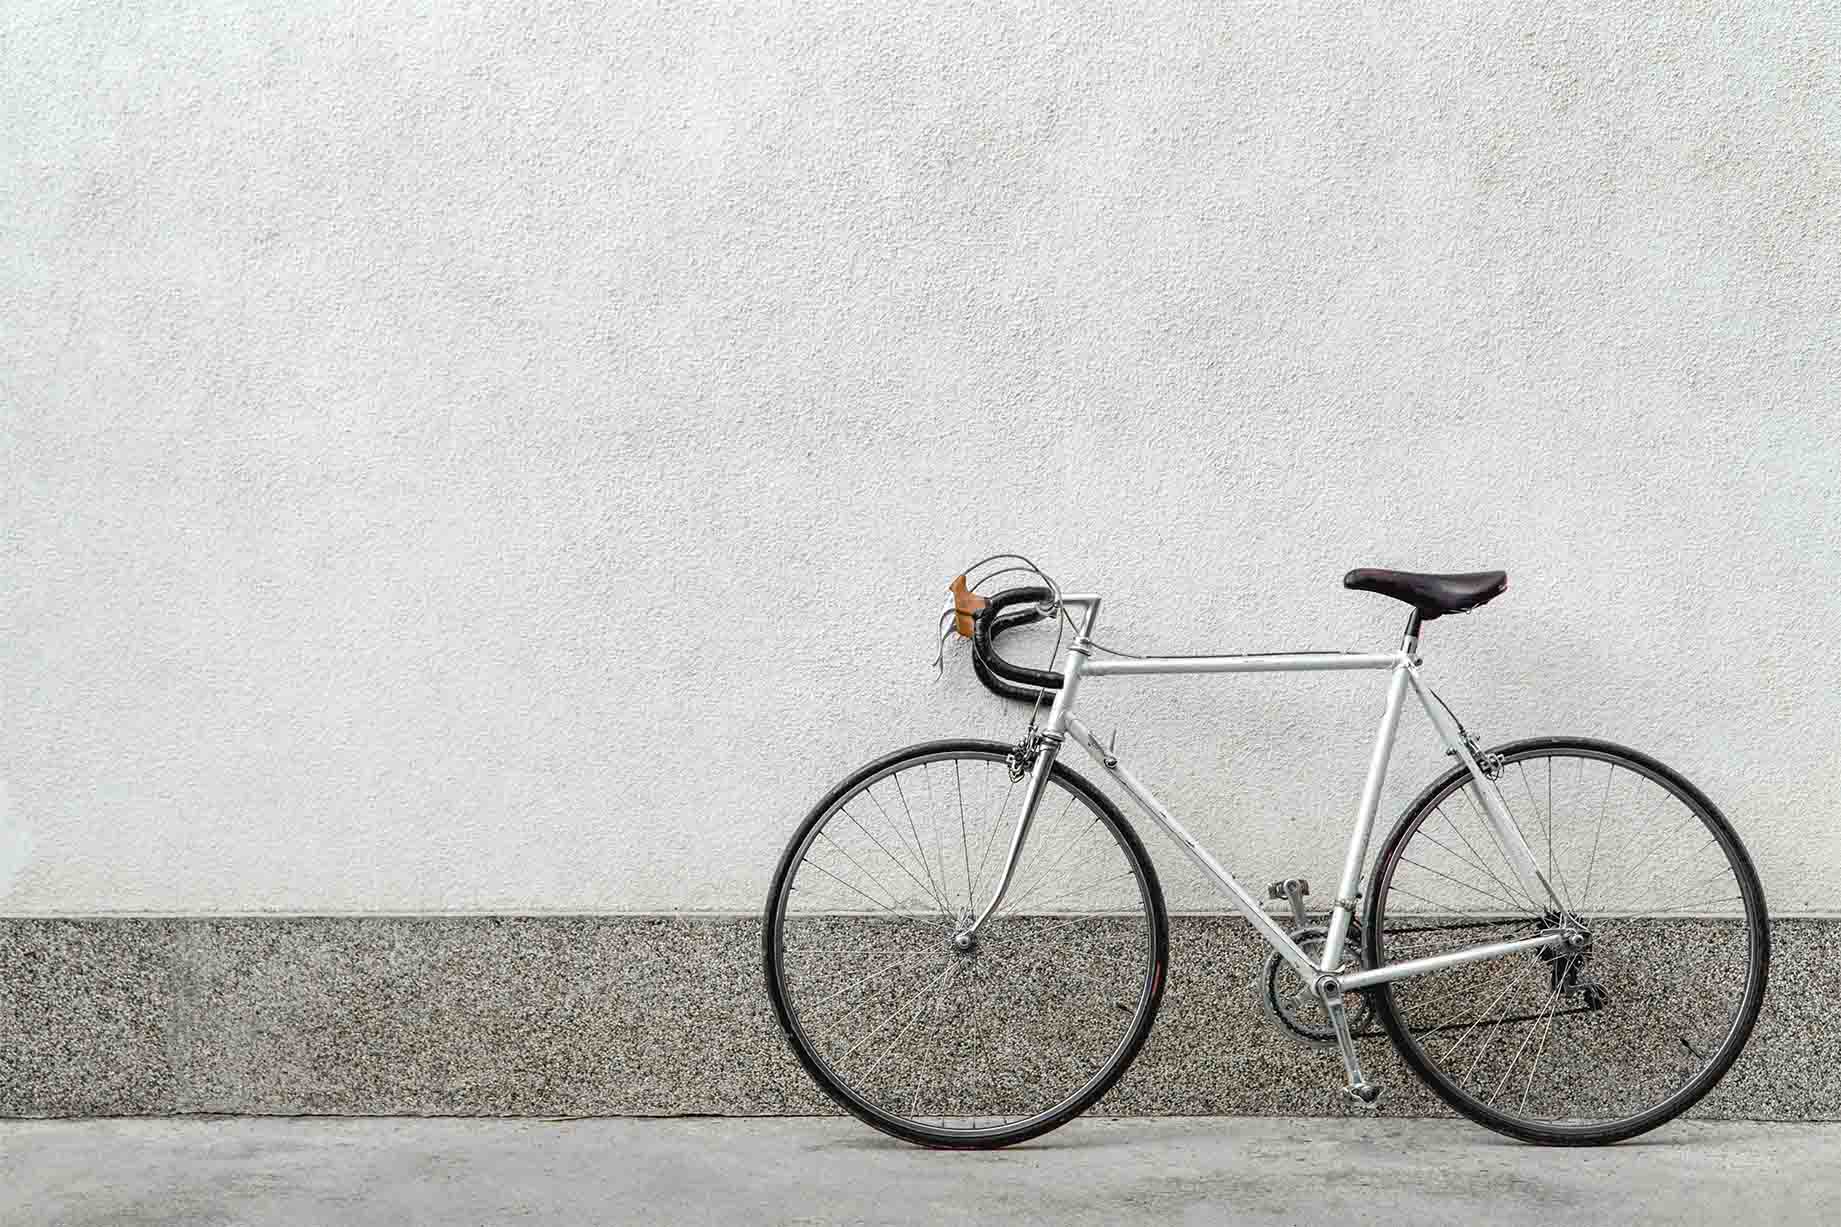 Bike in front of a white wall